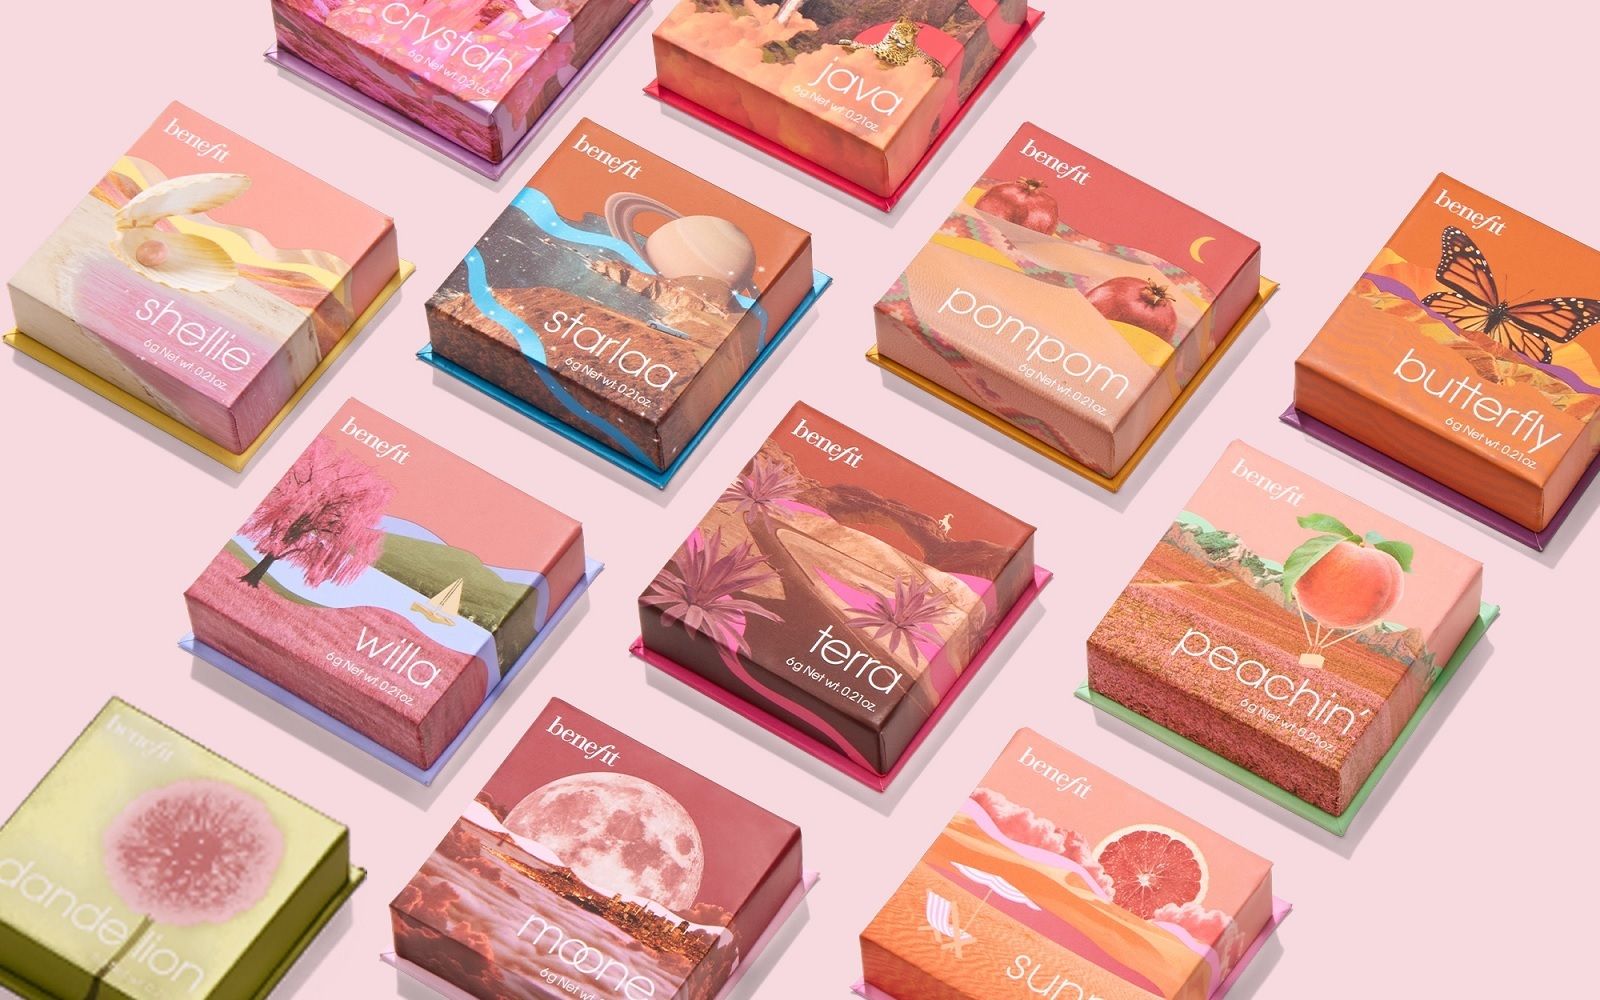 The new Wanderful powders by Benefit Cosmetics